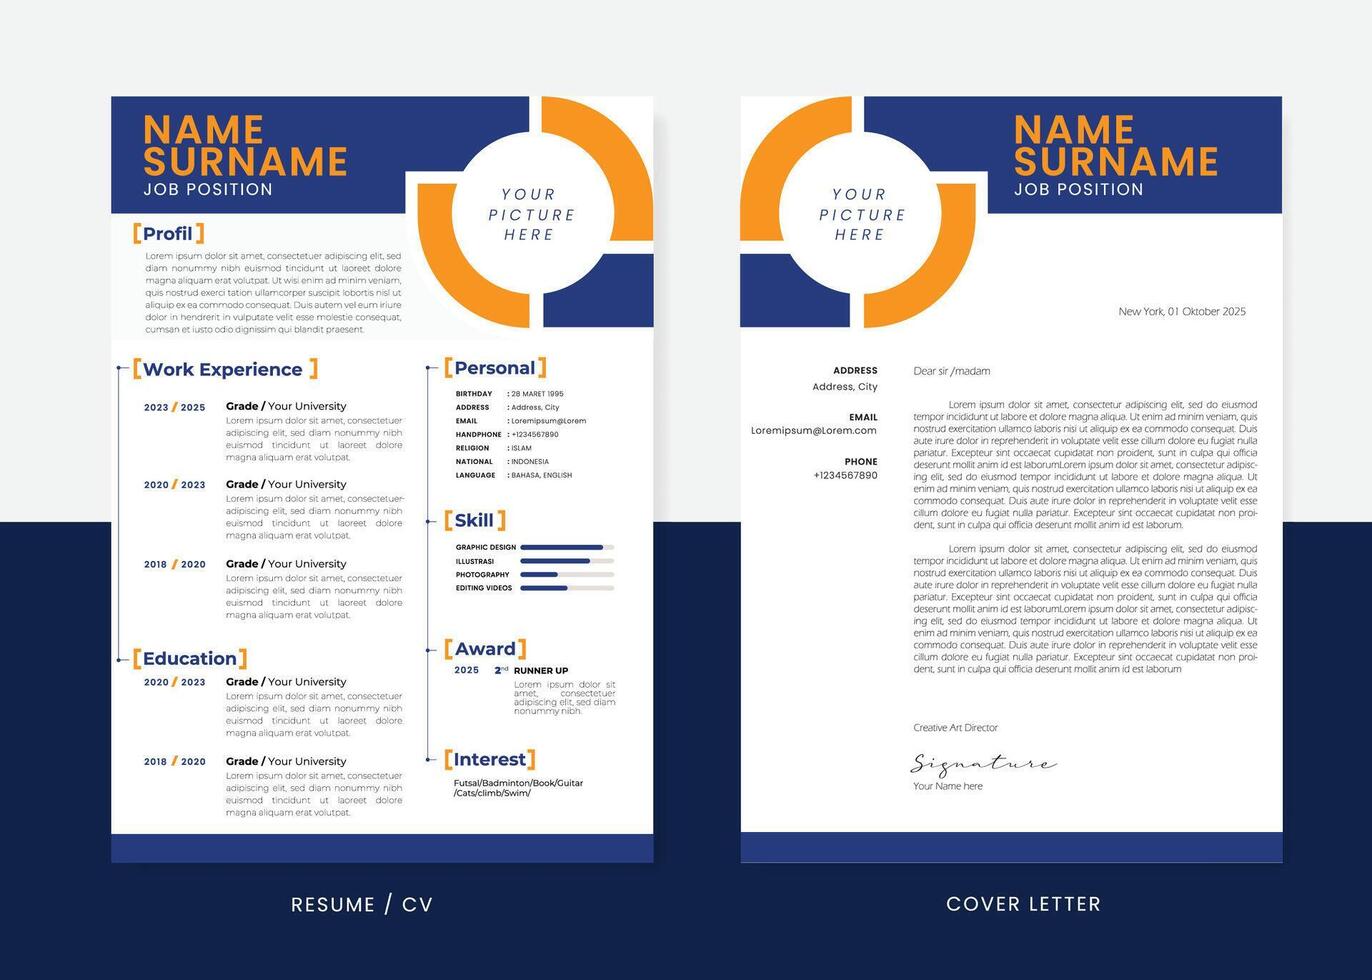 Minimalist CV Resume and Cover Letter Design Template. Professional Modern Design. Stylish Minimalist Elements and Icons with Blue and Orange Color. vector